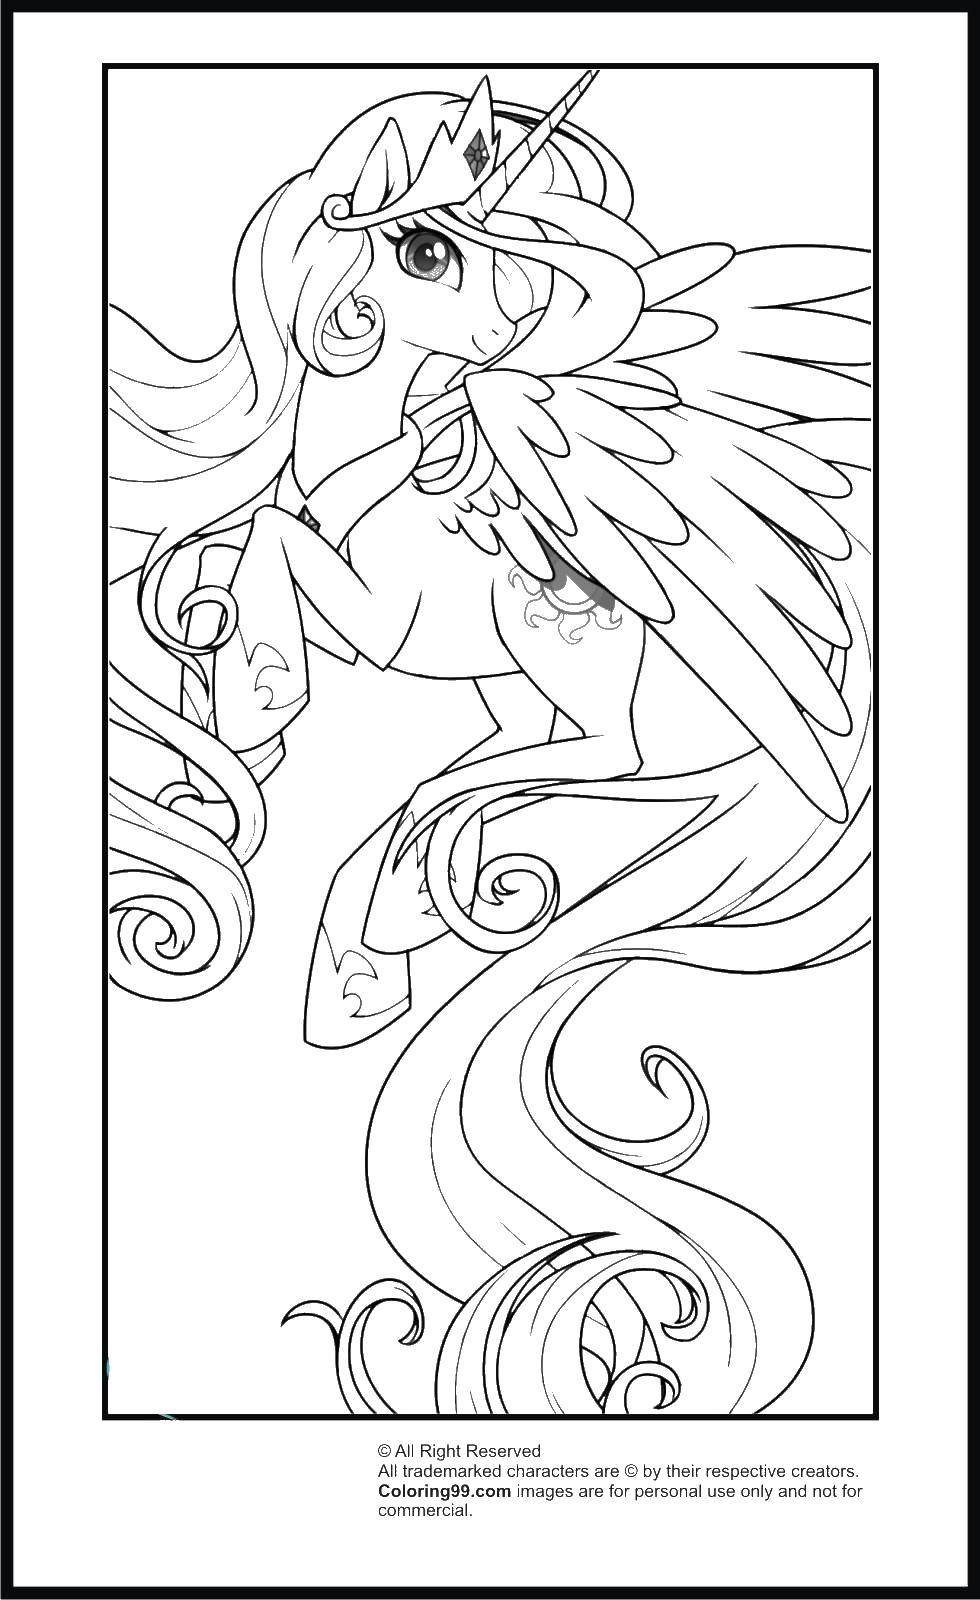 Coloring Winged unicorn. Category my little pony. Tags:  unicorn, wings, tail.